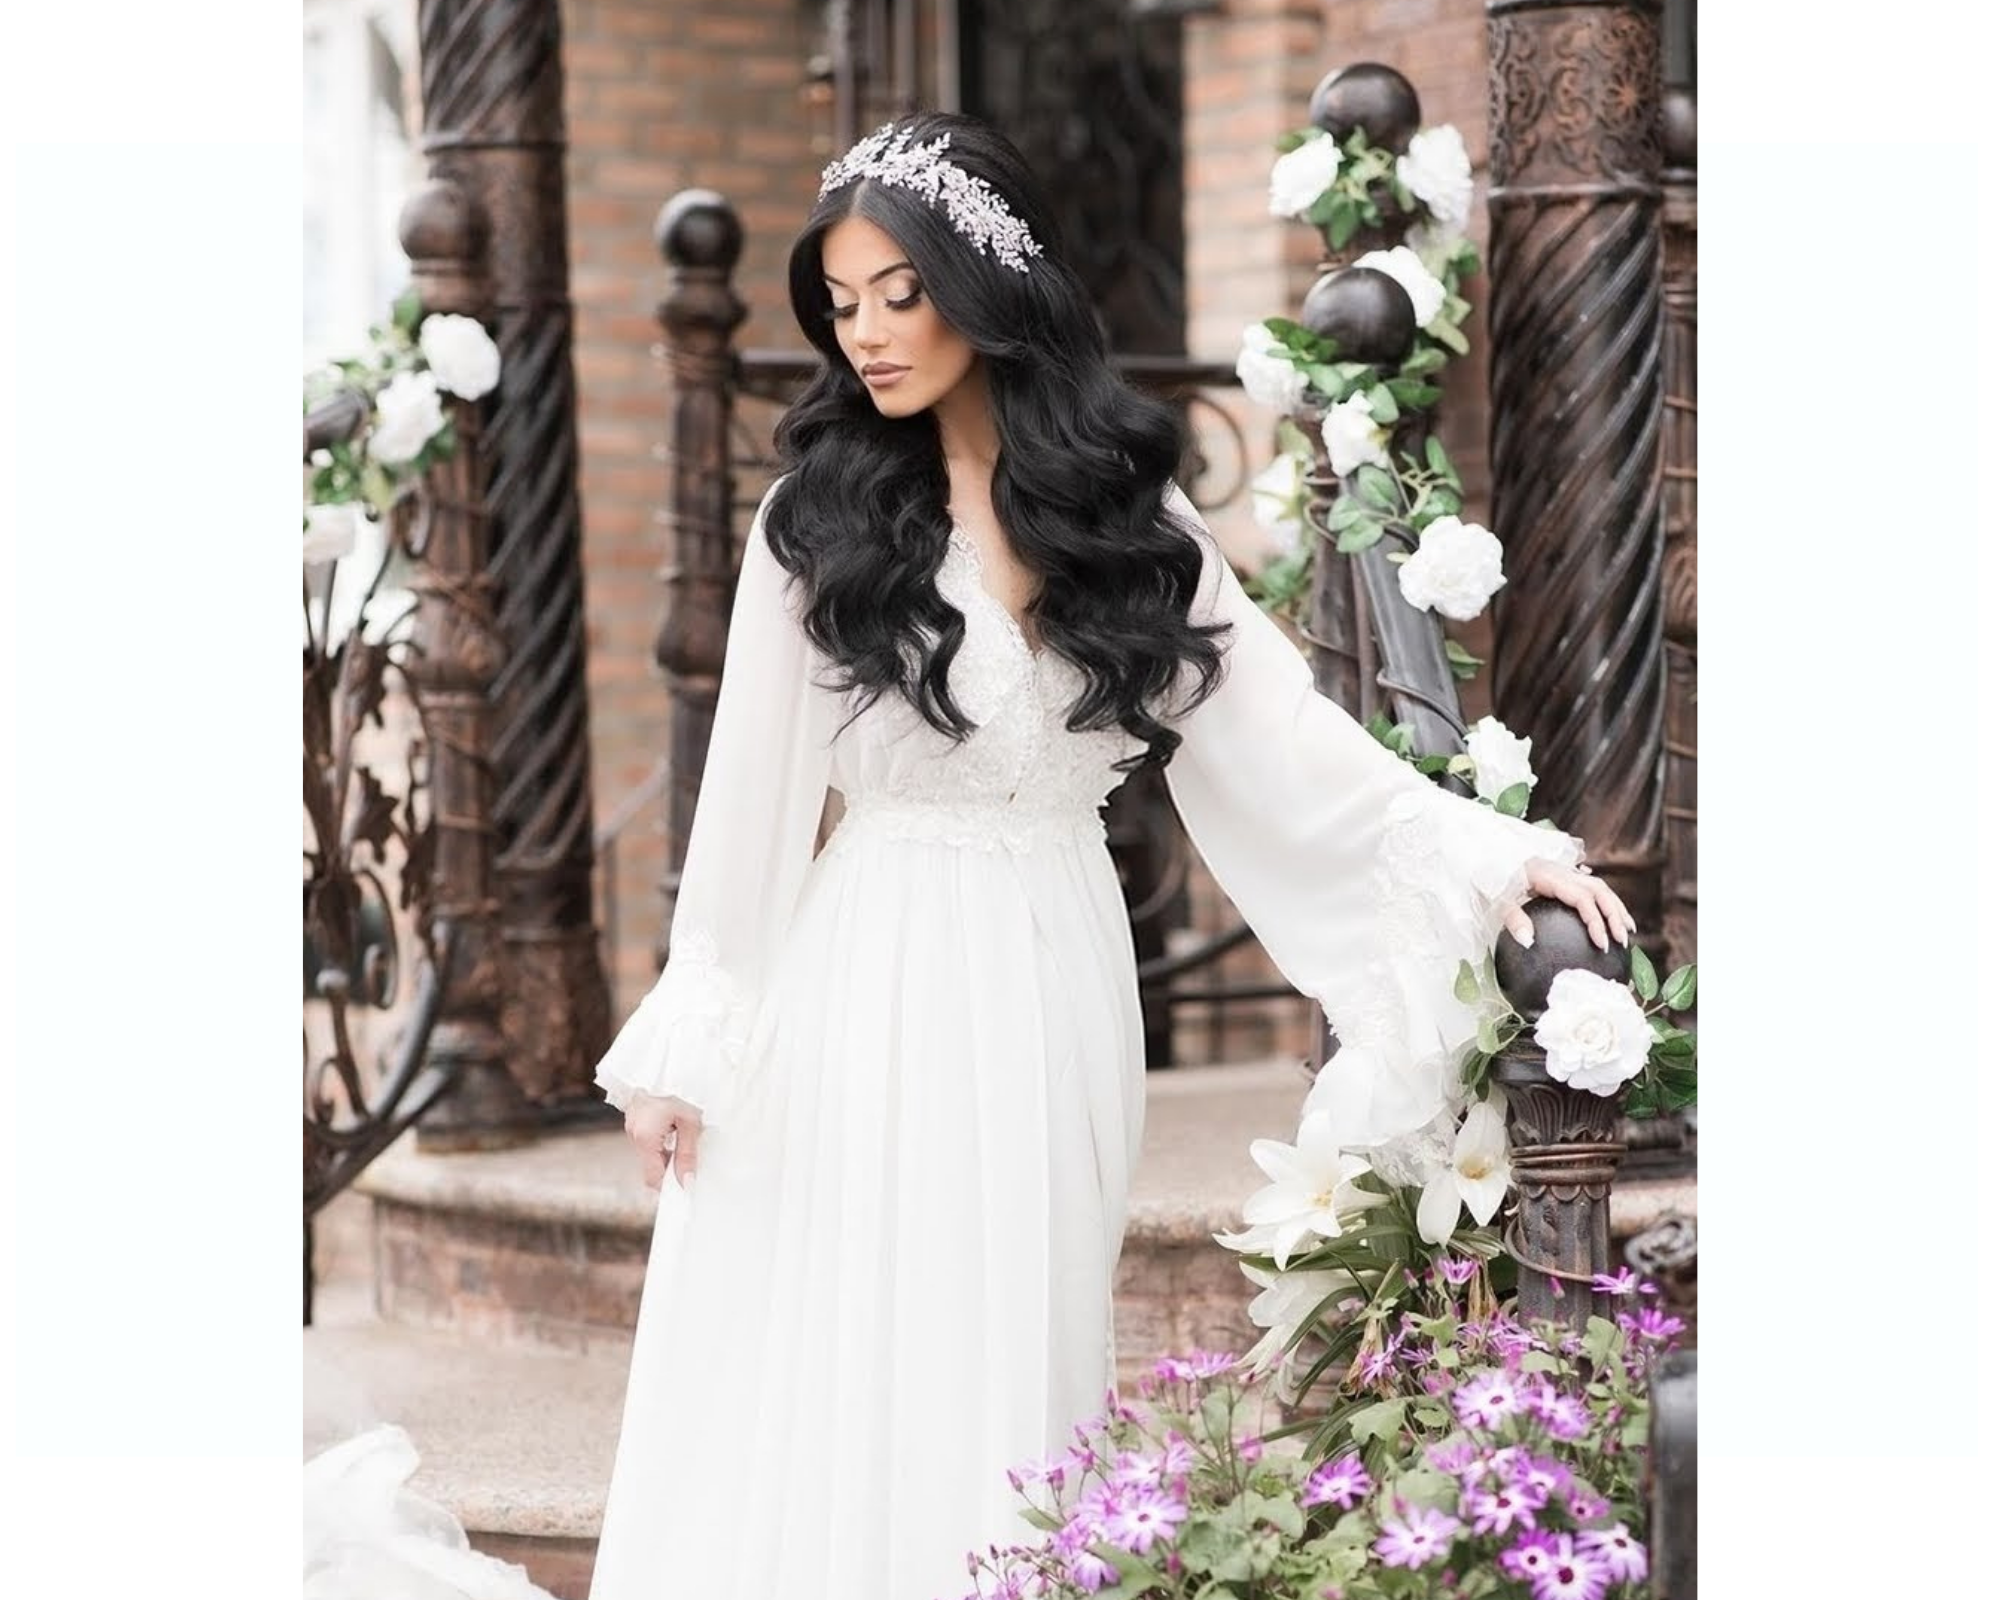 Our stunning bride wore her long hair in loose waves with a Swarovski crystal hair vine. 